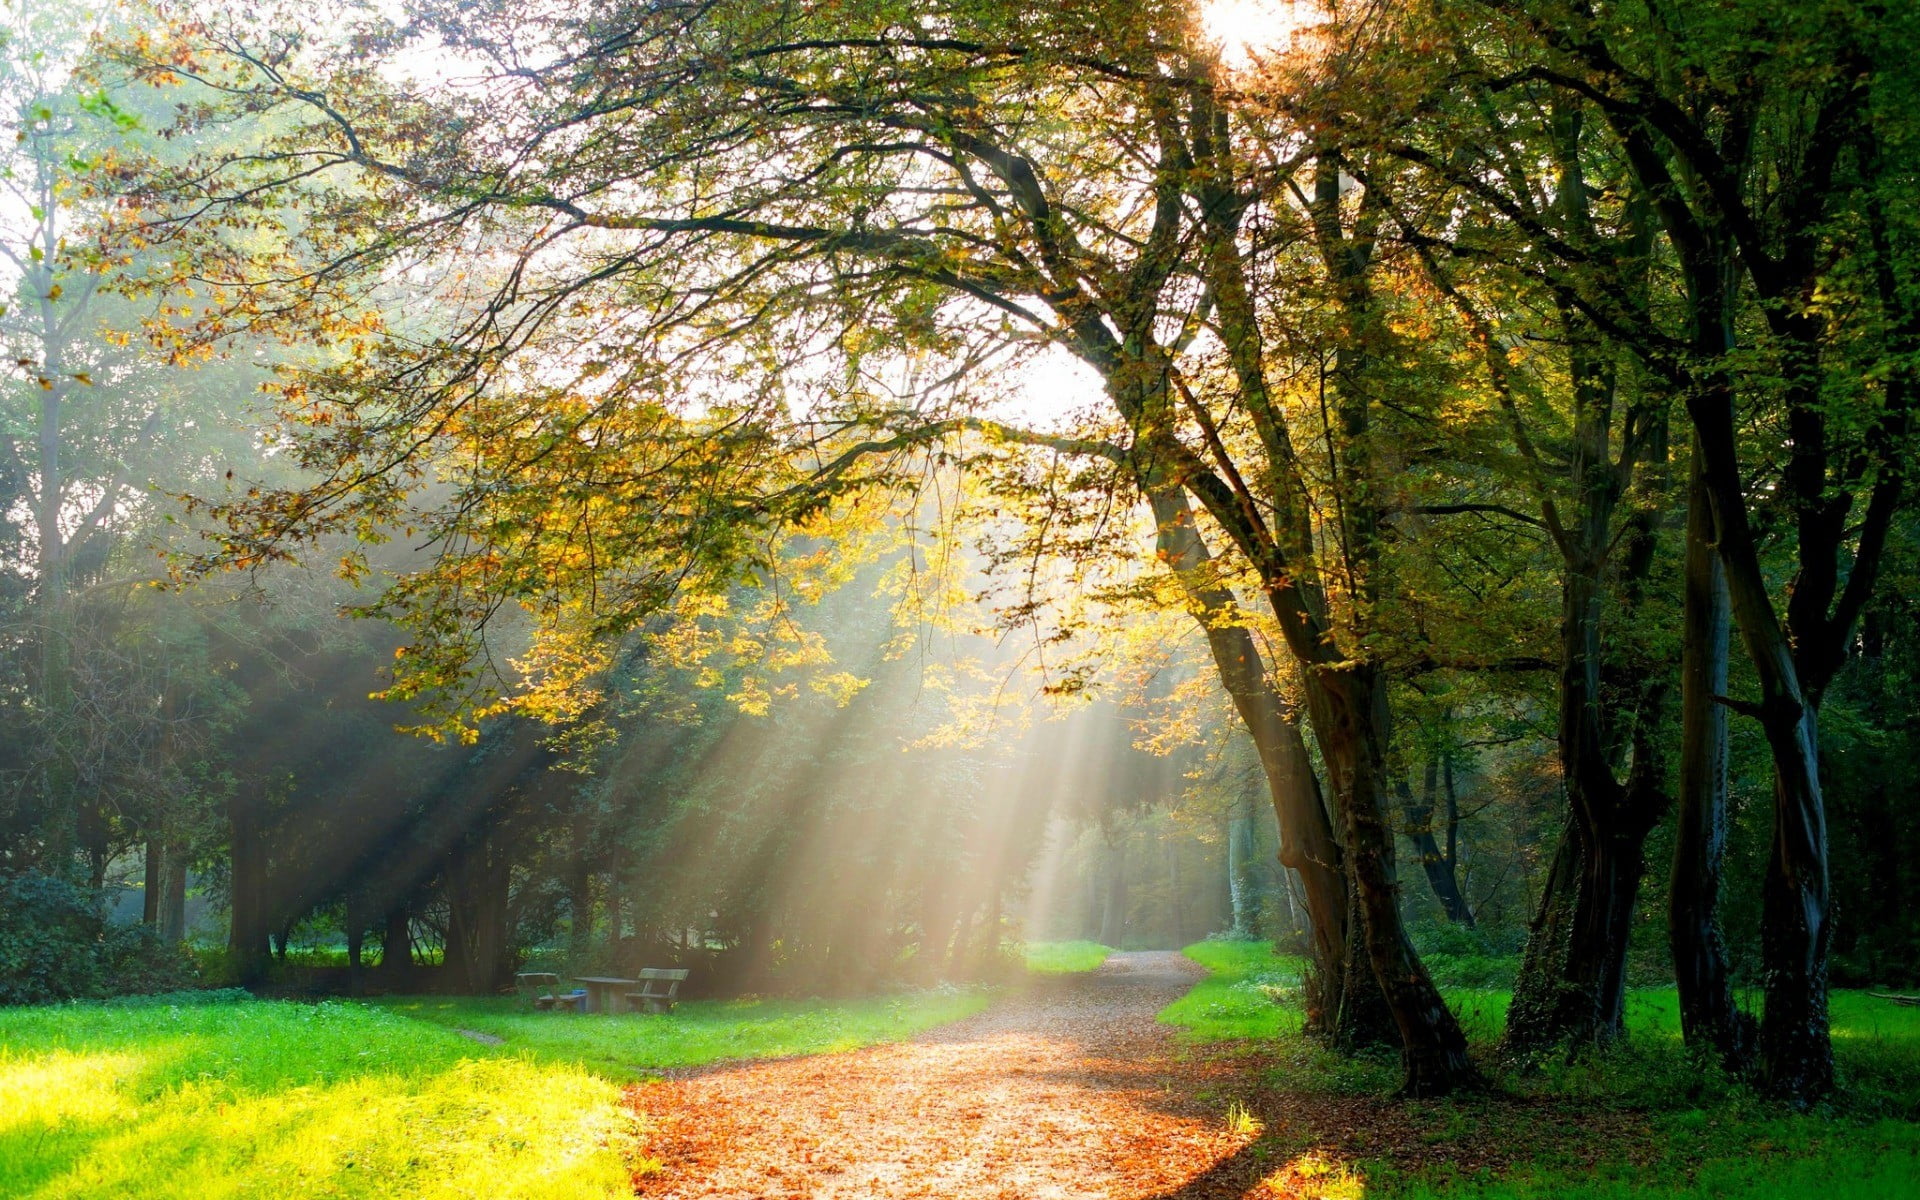 3840x2160 resolution | green leafed trees, trees, path, sun rays, dirt ...